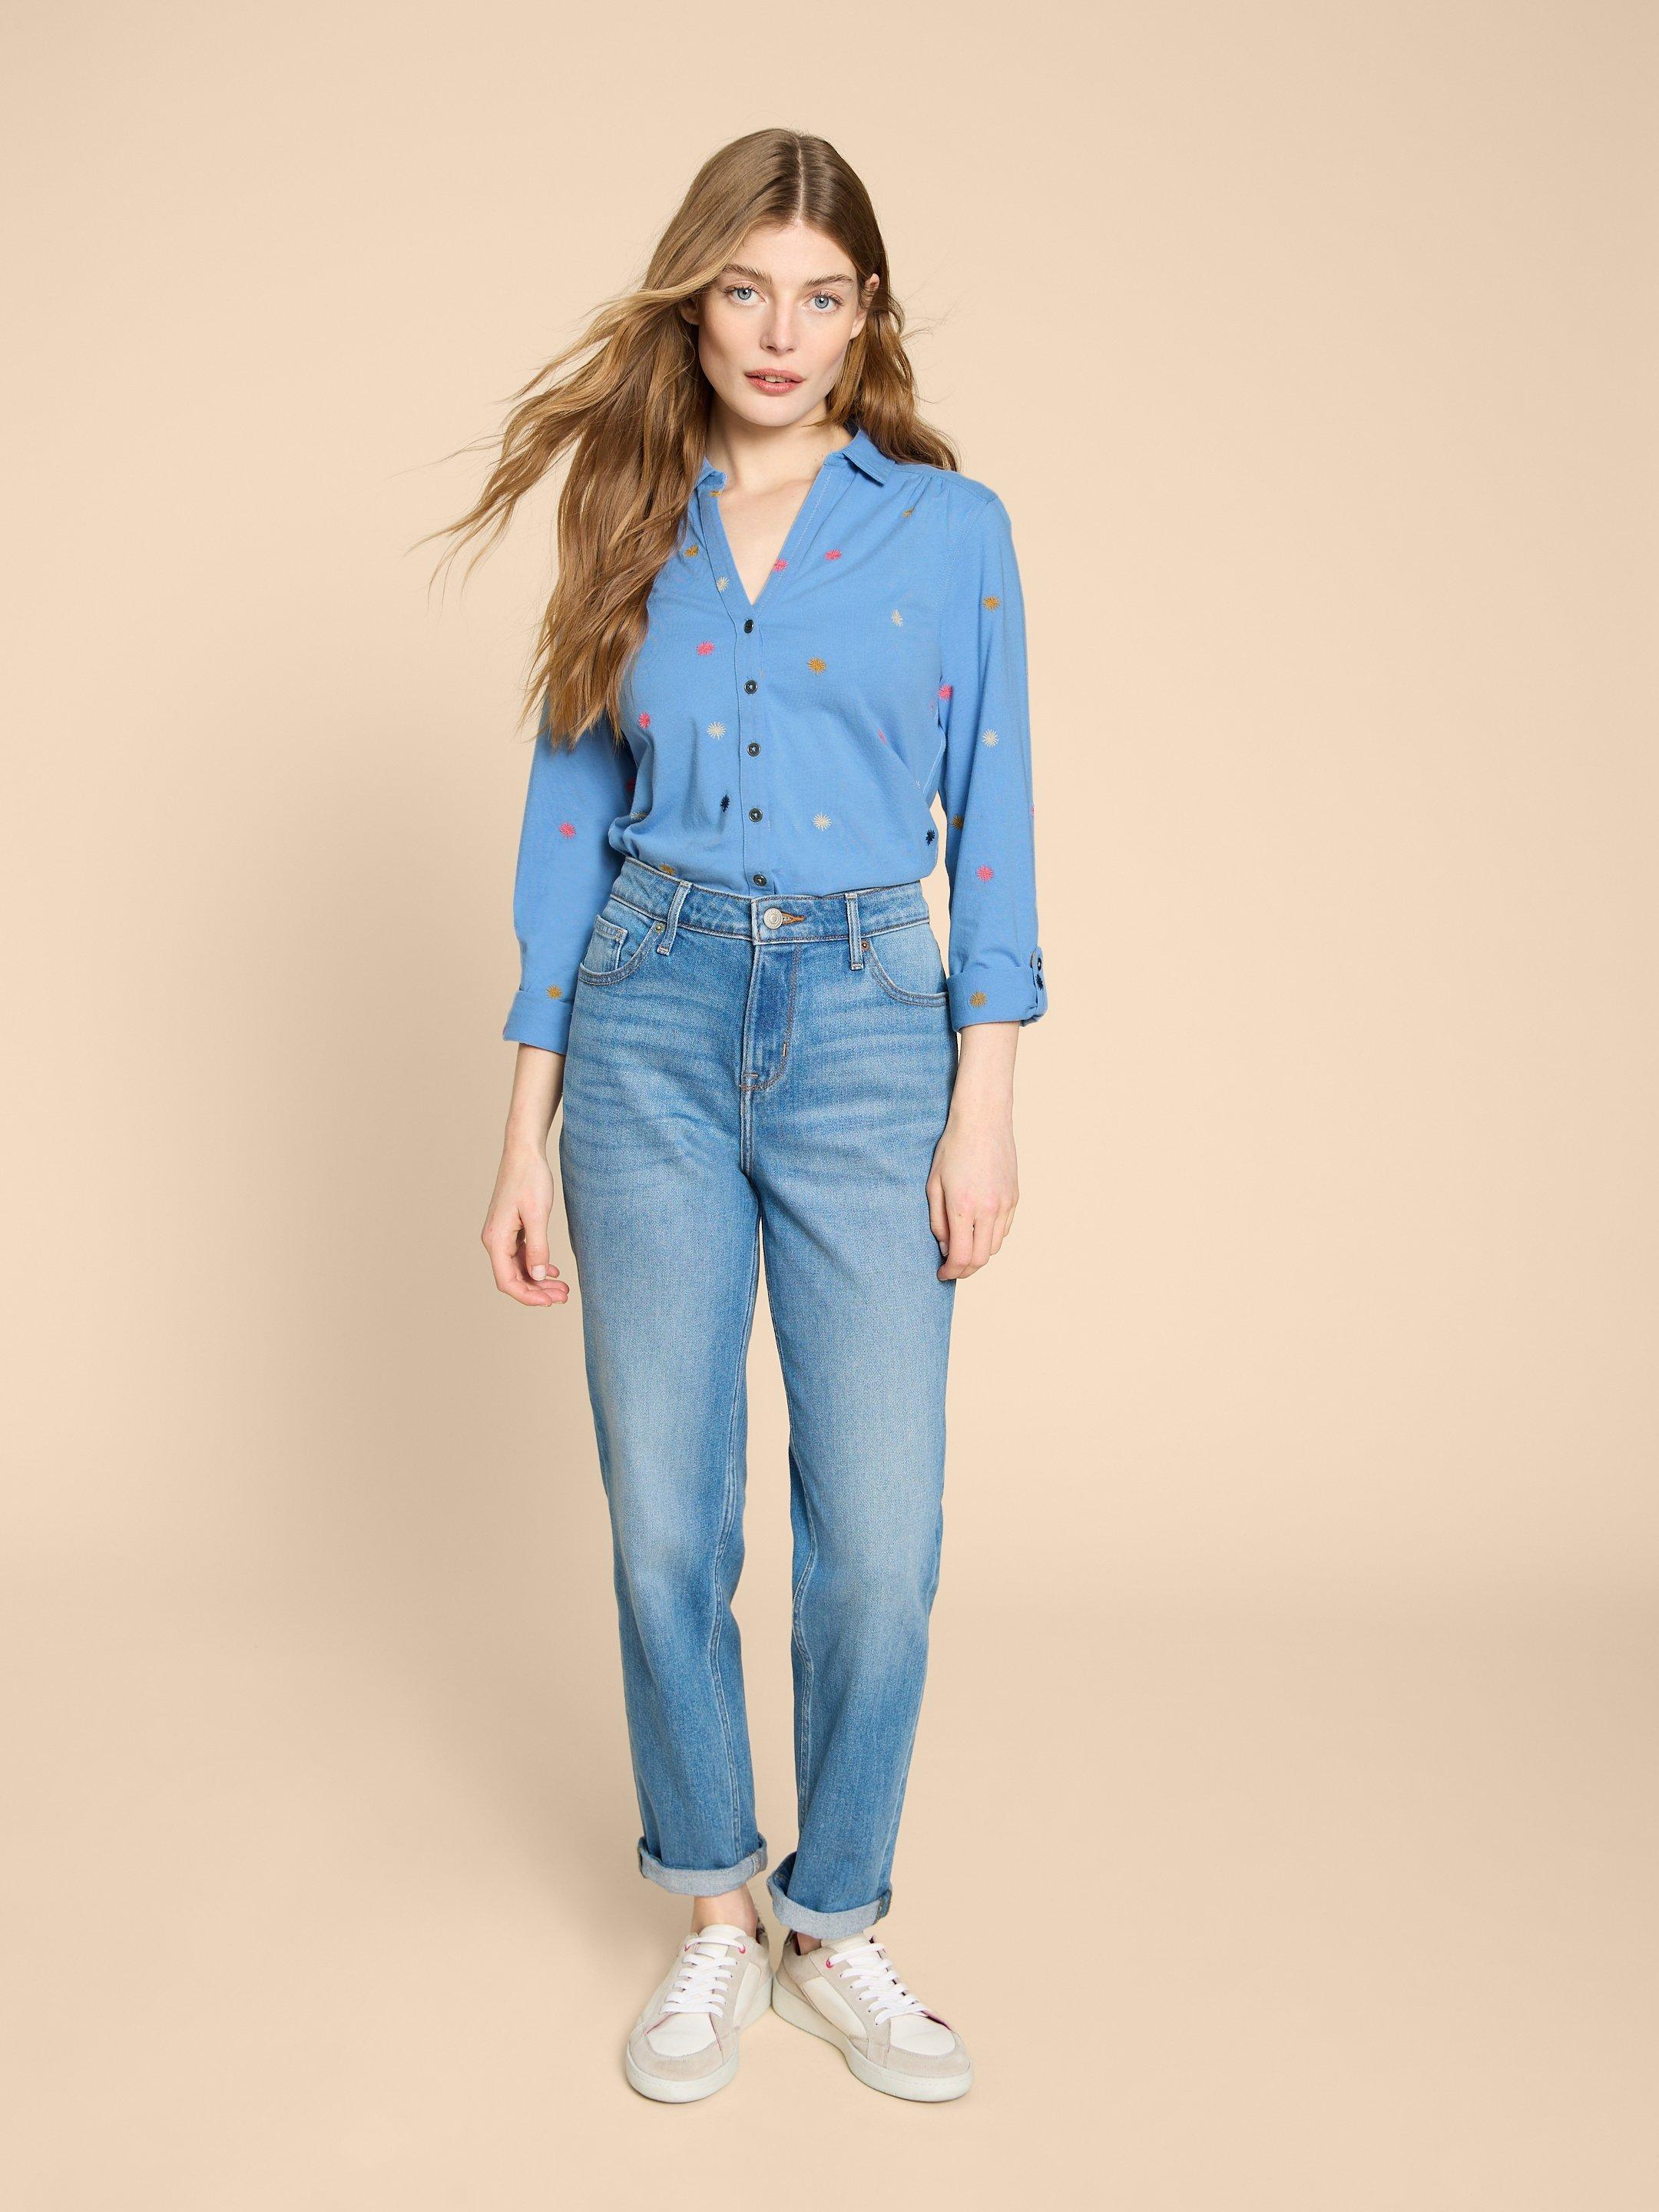 ANNIE JERSEY EMBROIDERED SHIRT in BLUE MLT - MODEL FRONT